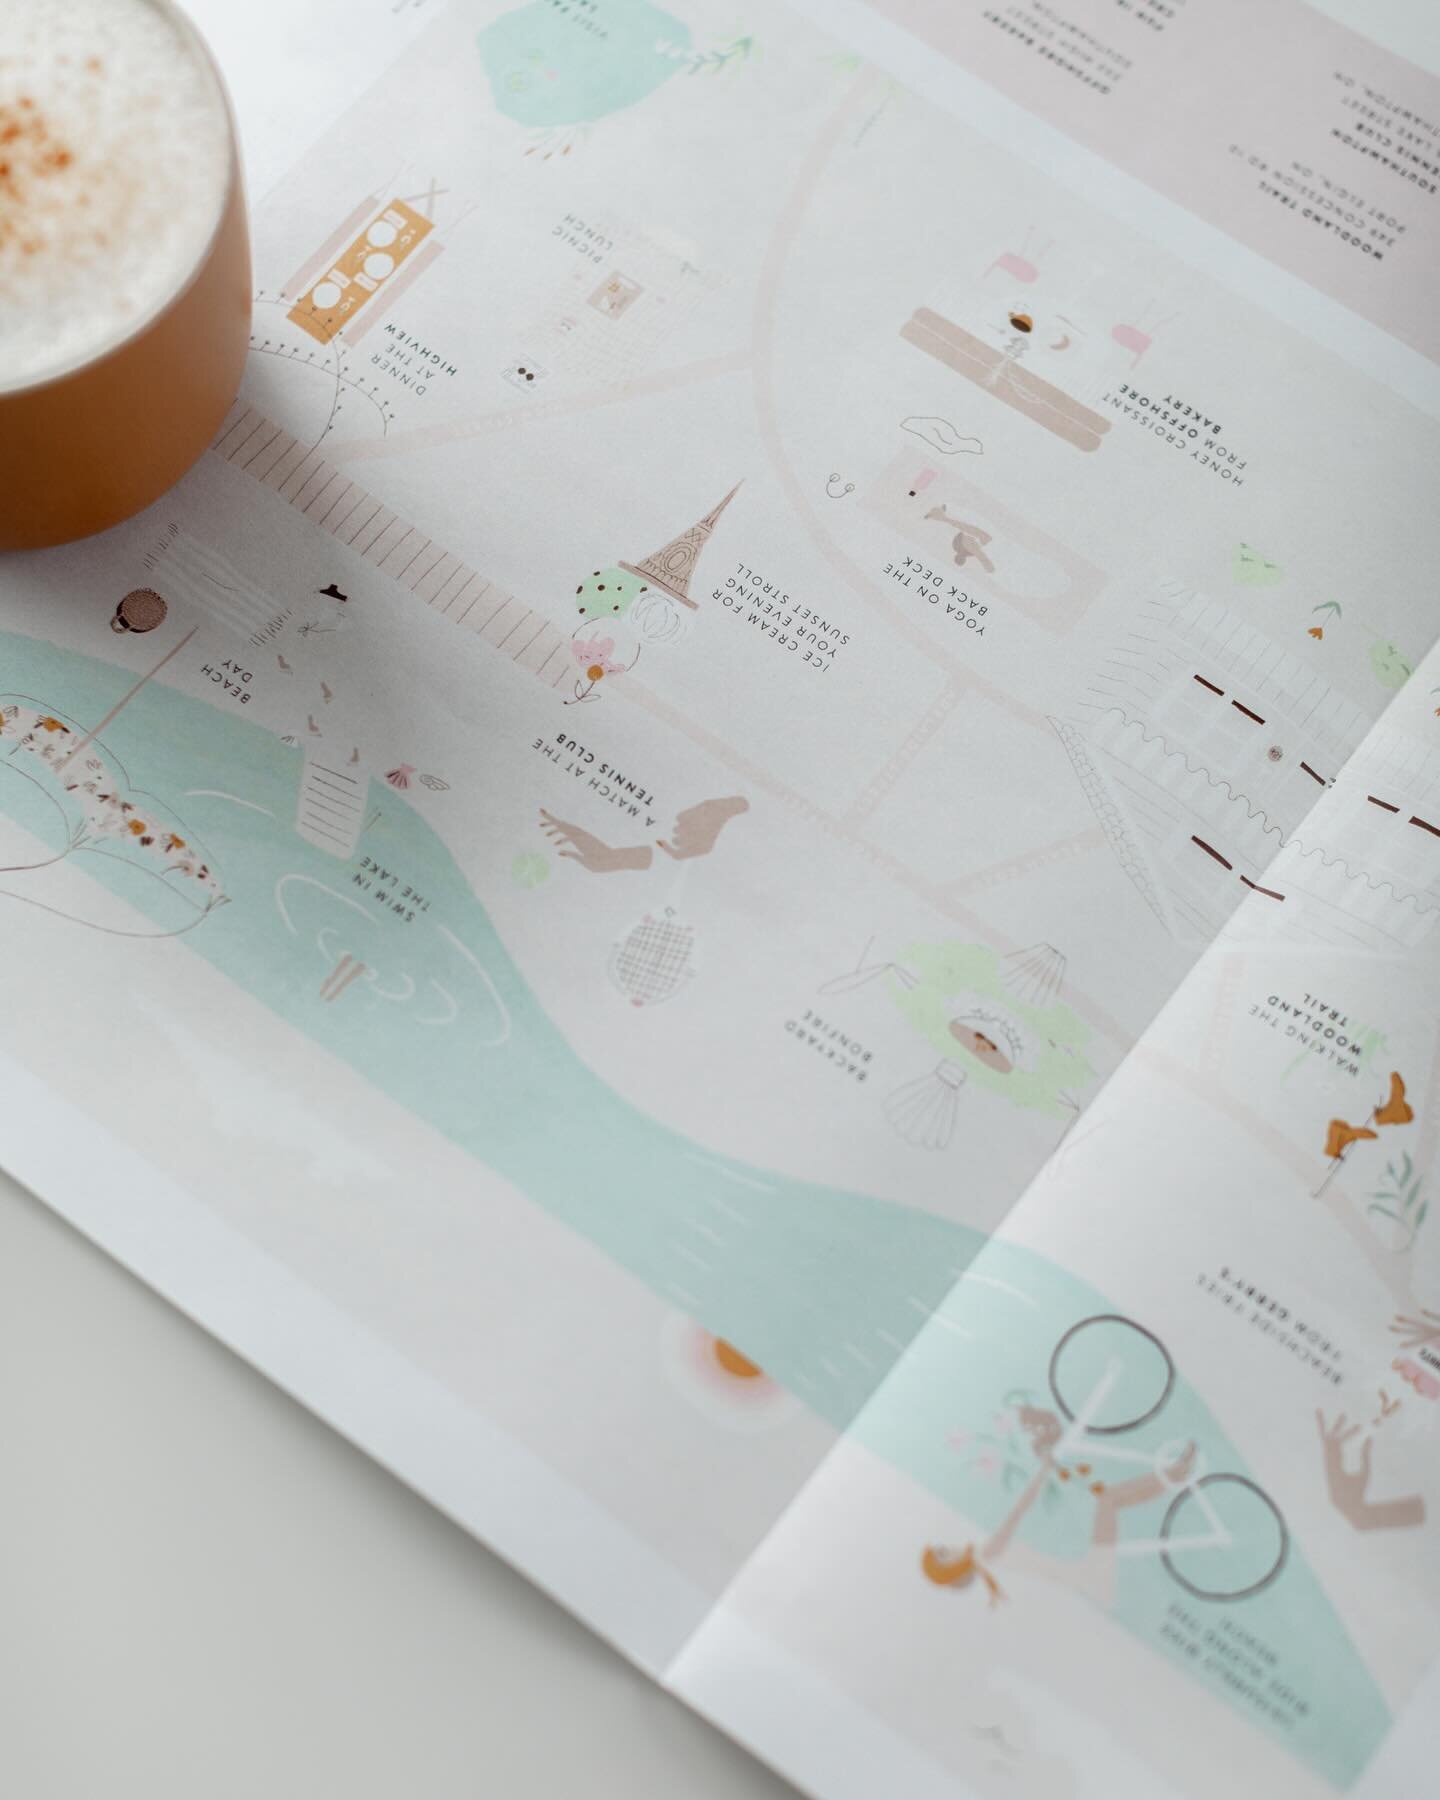 Had so much fun creating this map with @studiobicyclette for @visitsummerhouse 

Illustrated maps are a powerful tool with which to market your business or share your story. They can be used in print or online and are fully customizable to your brand